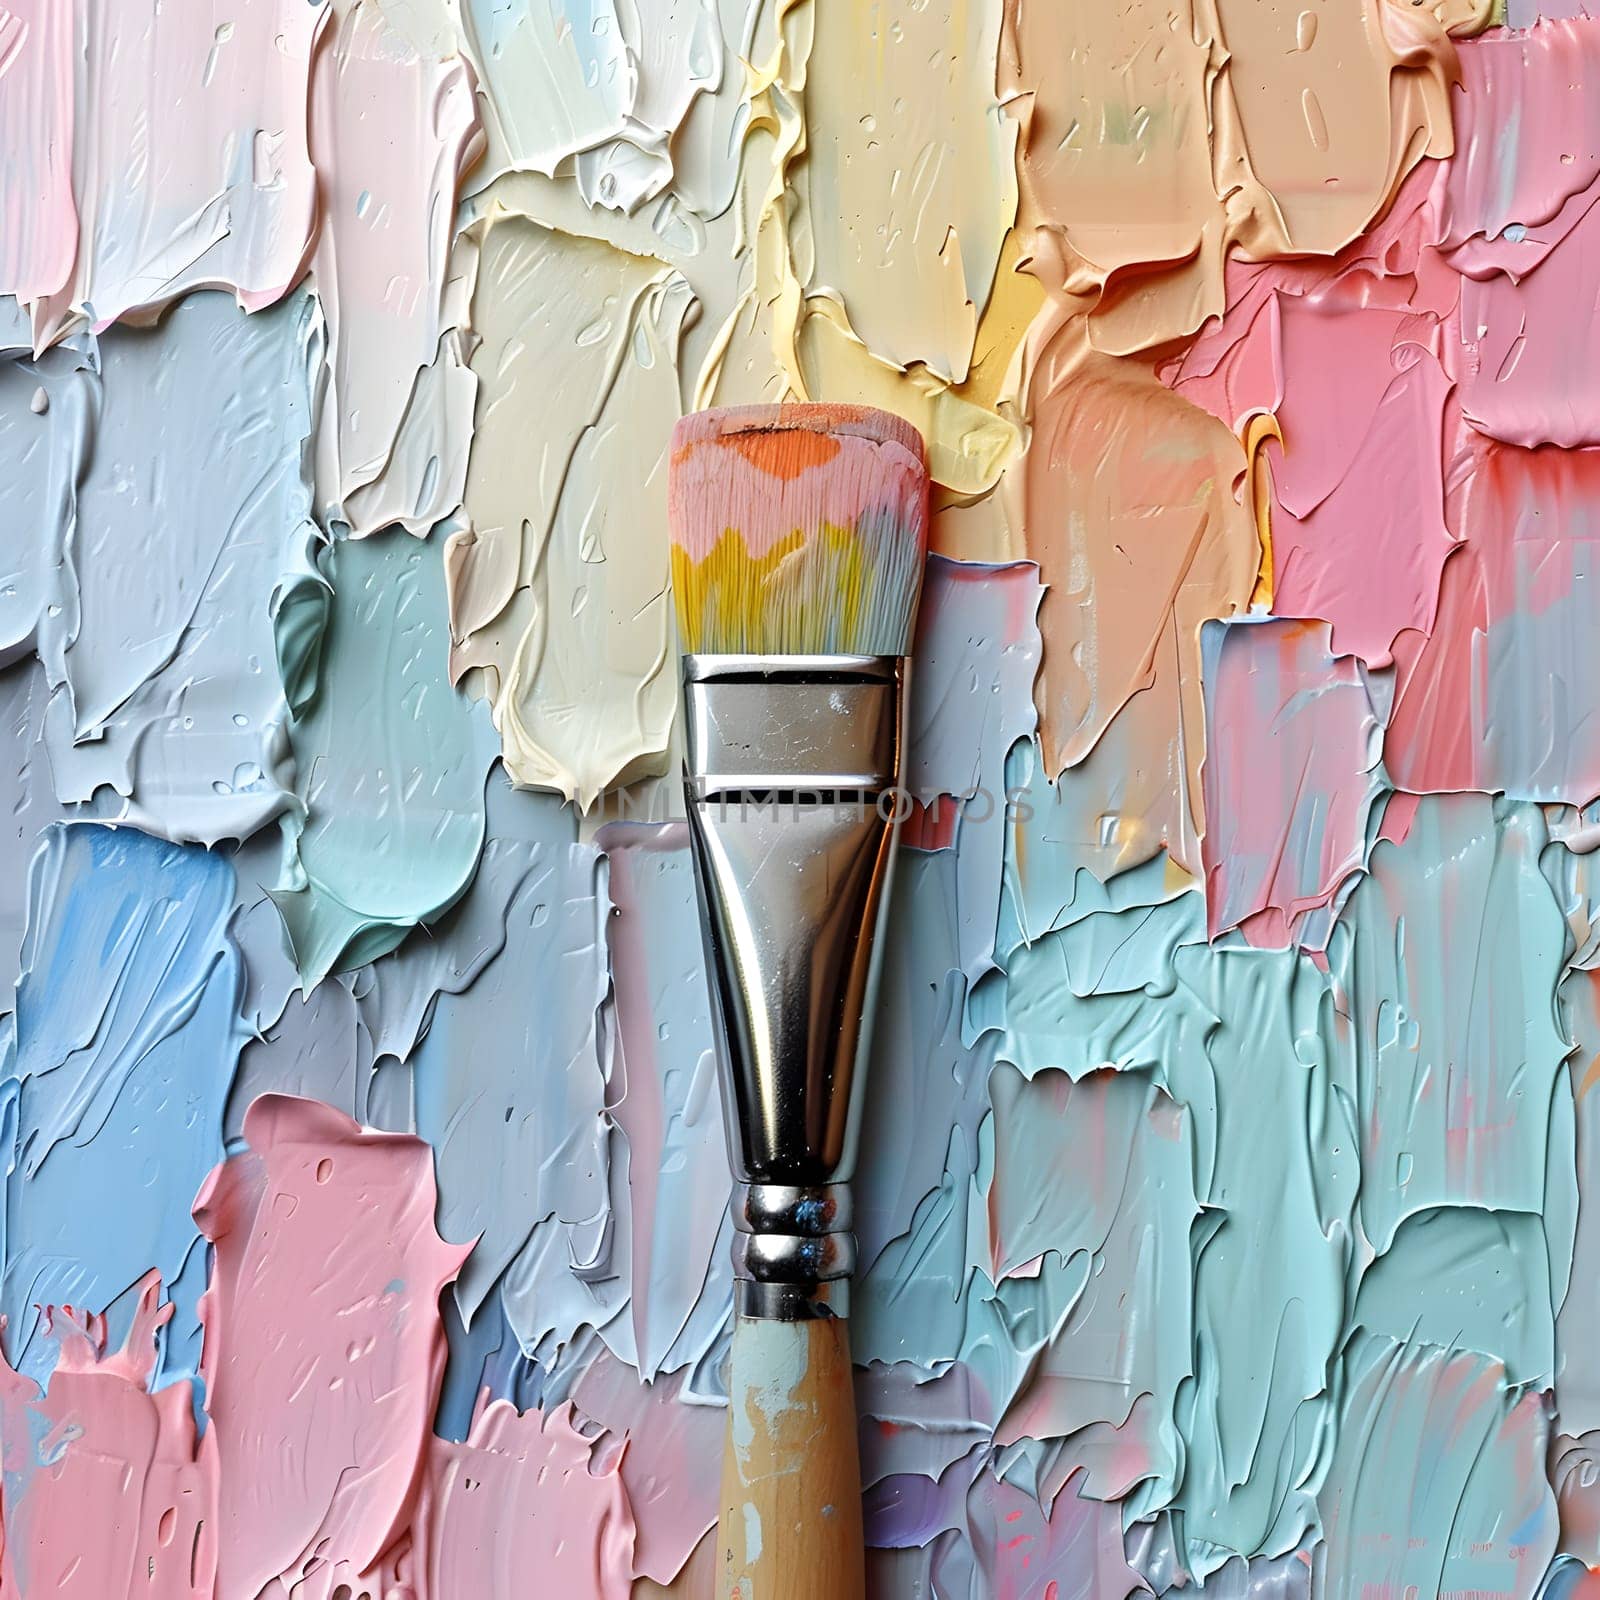 A brush rests next to a vibrant painting, showcasing the artists use of color and technique. The artwork captures the viewers attention with its bold strokes and expressive gestures